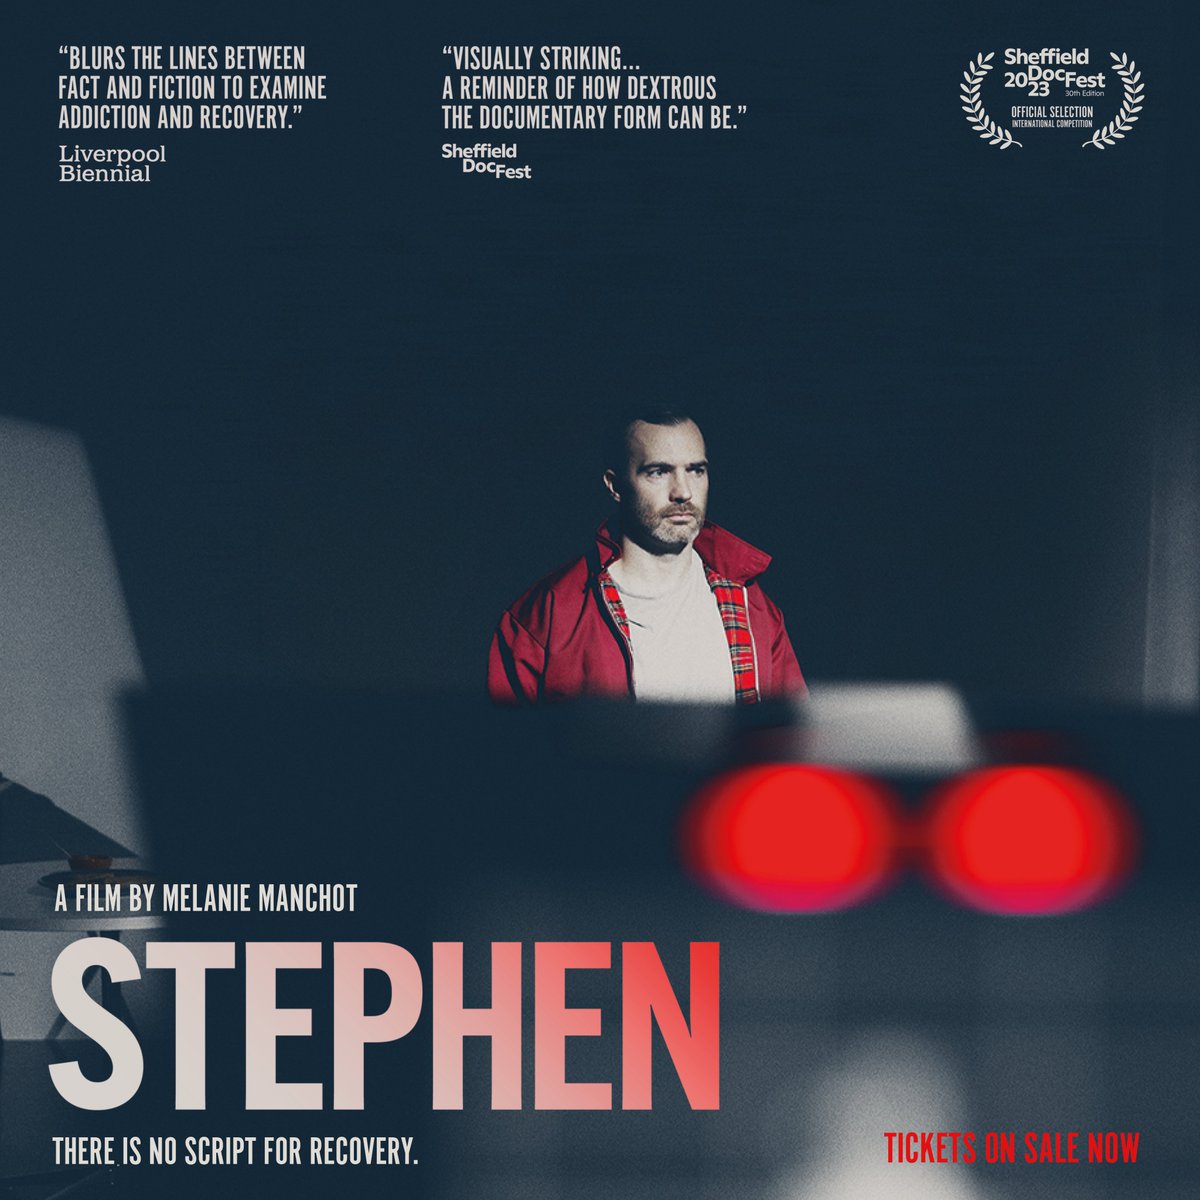 Melanie Manchot’s STEPHEN continues to screen in cinemas nationwide, with Q&A event screenings in London, Oxford, Cambridge, Colchester, Liverpool, Edinburgh, Belfast and Milton Keynes. Don’t miss tomorrow’s Q&A screening at the @riocinema! Book tickets: modernfilms.com/stephen